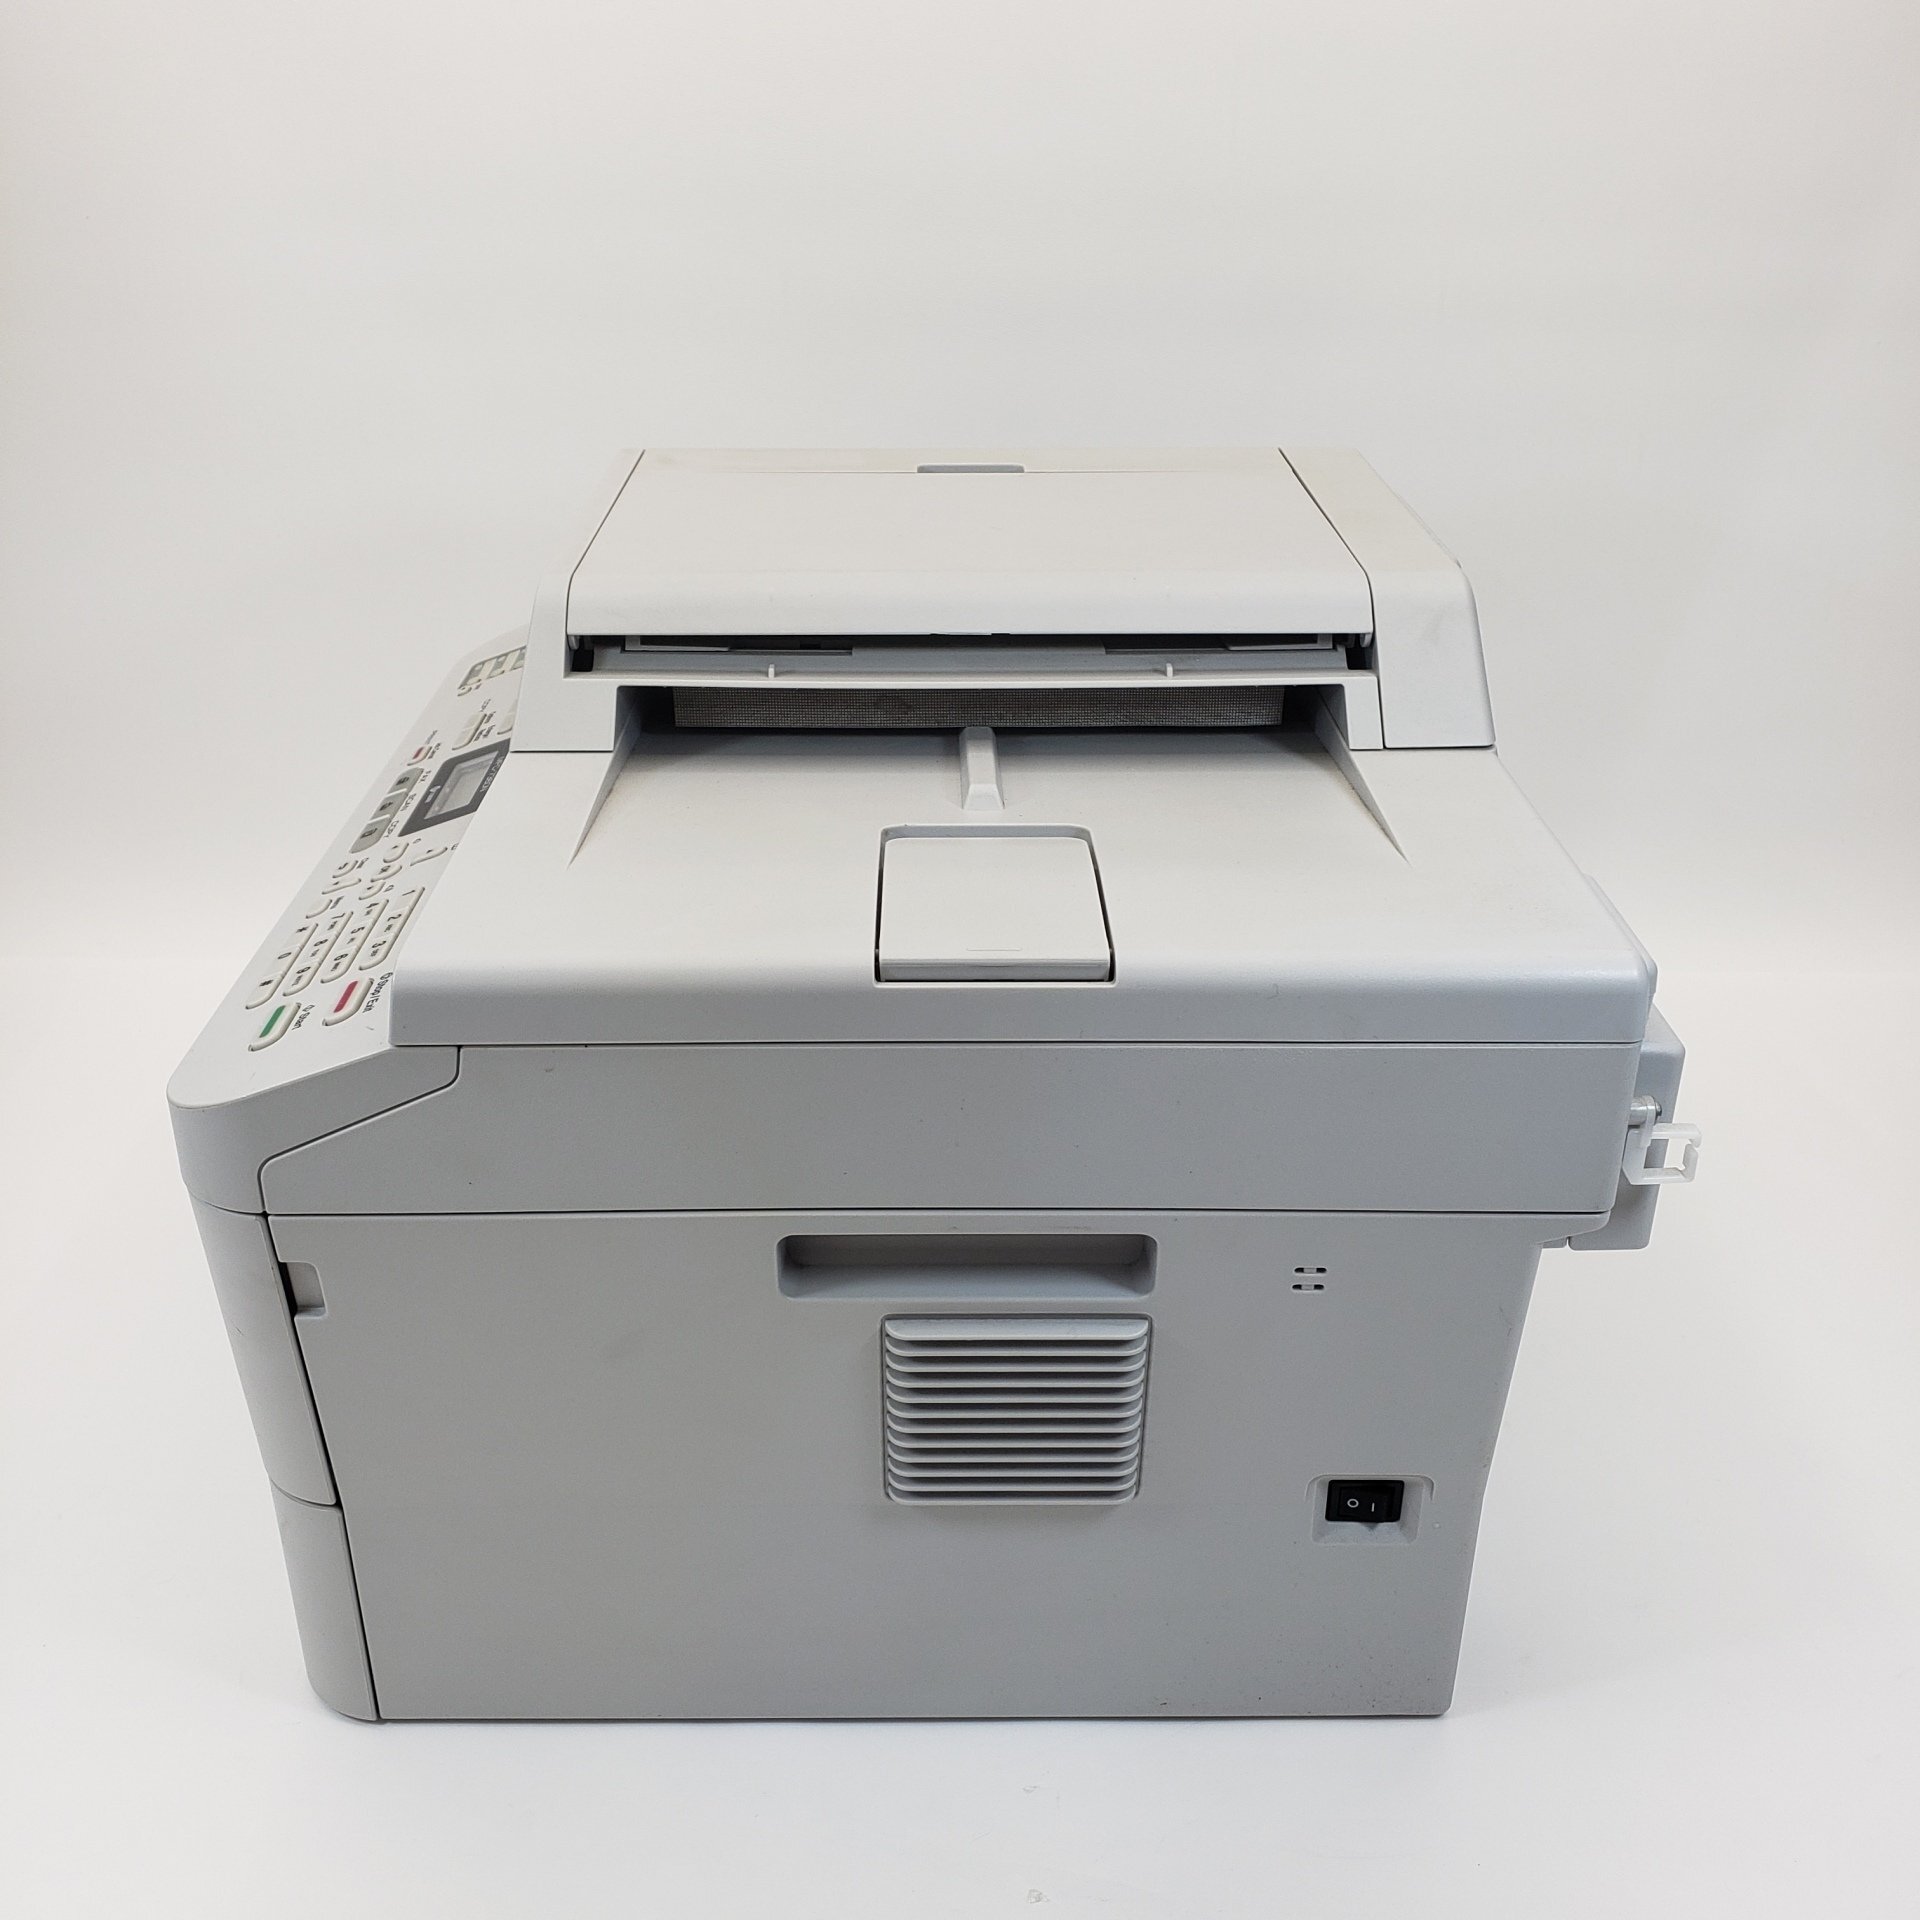 Brother MFC-7360N Network Monochrome All-in-One Laser Printer - Used